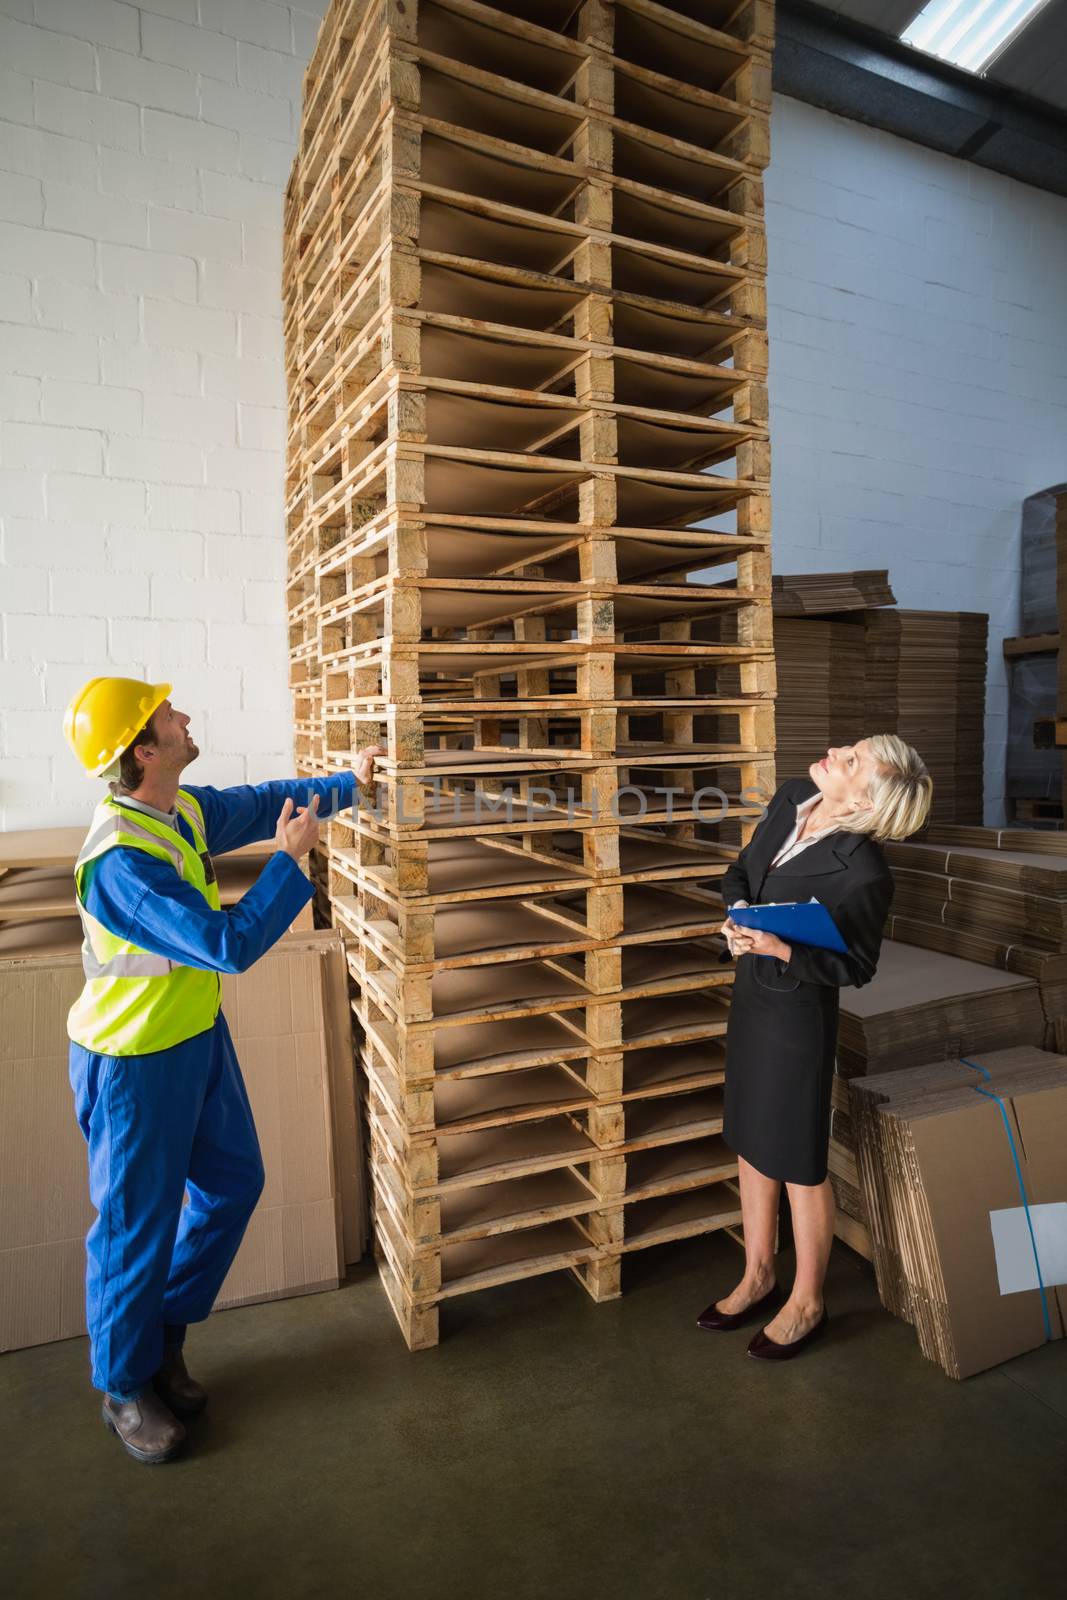 Warehouse worker and his manager looking stack of pallet in a large warehouse